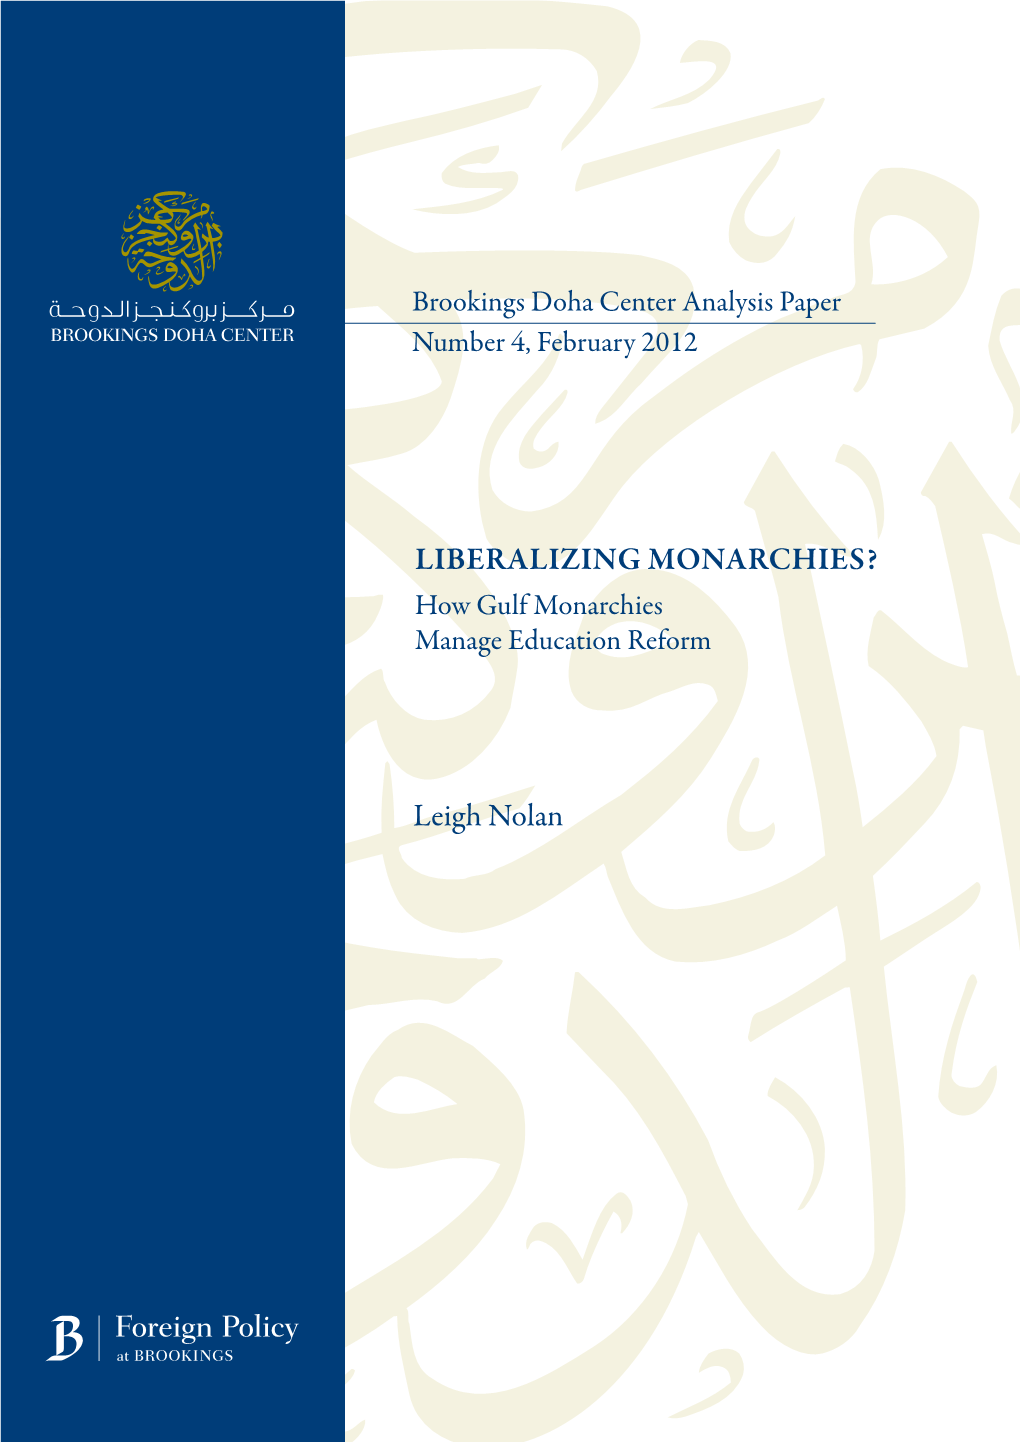 Liberalizing Monarchies? How Gulf Monarchies Manage Education Reform